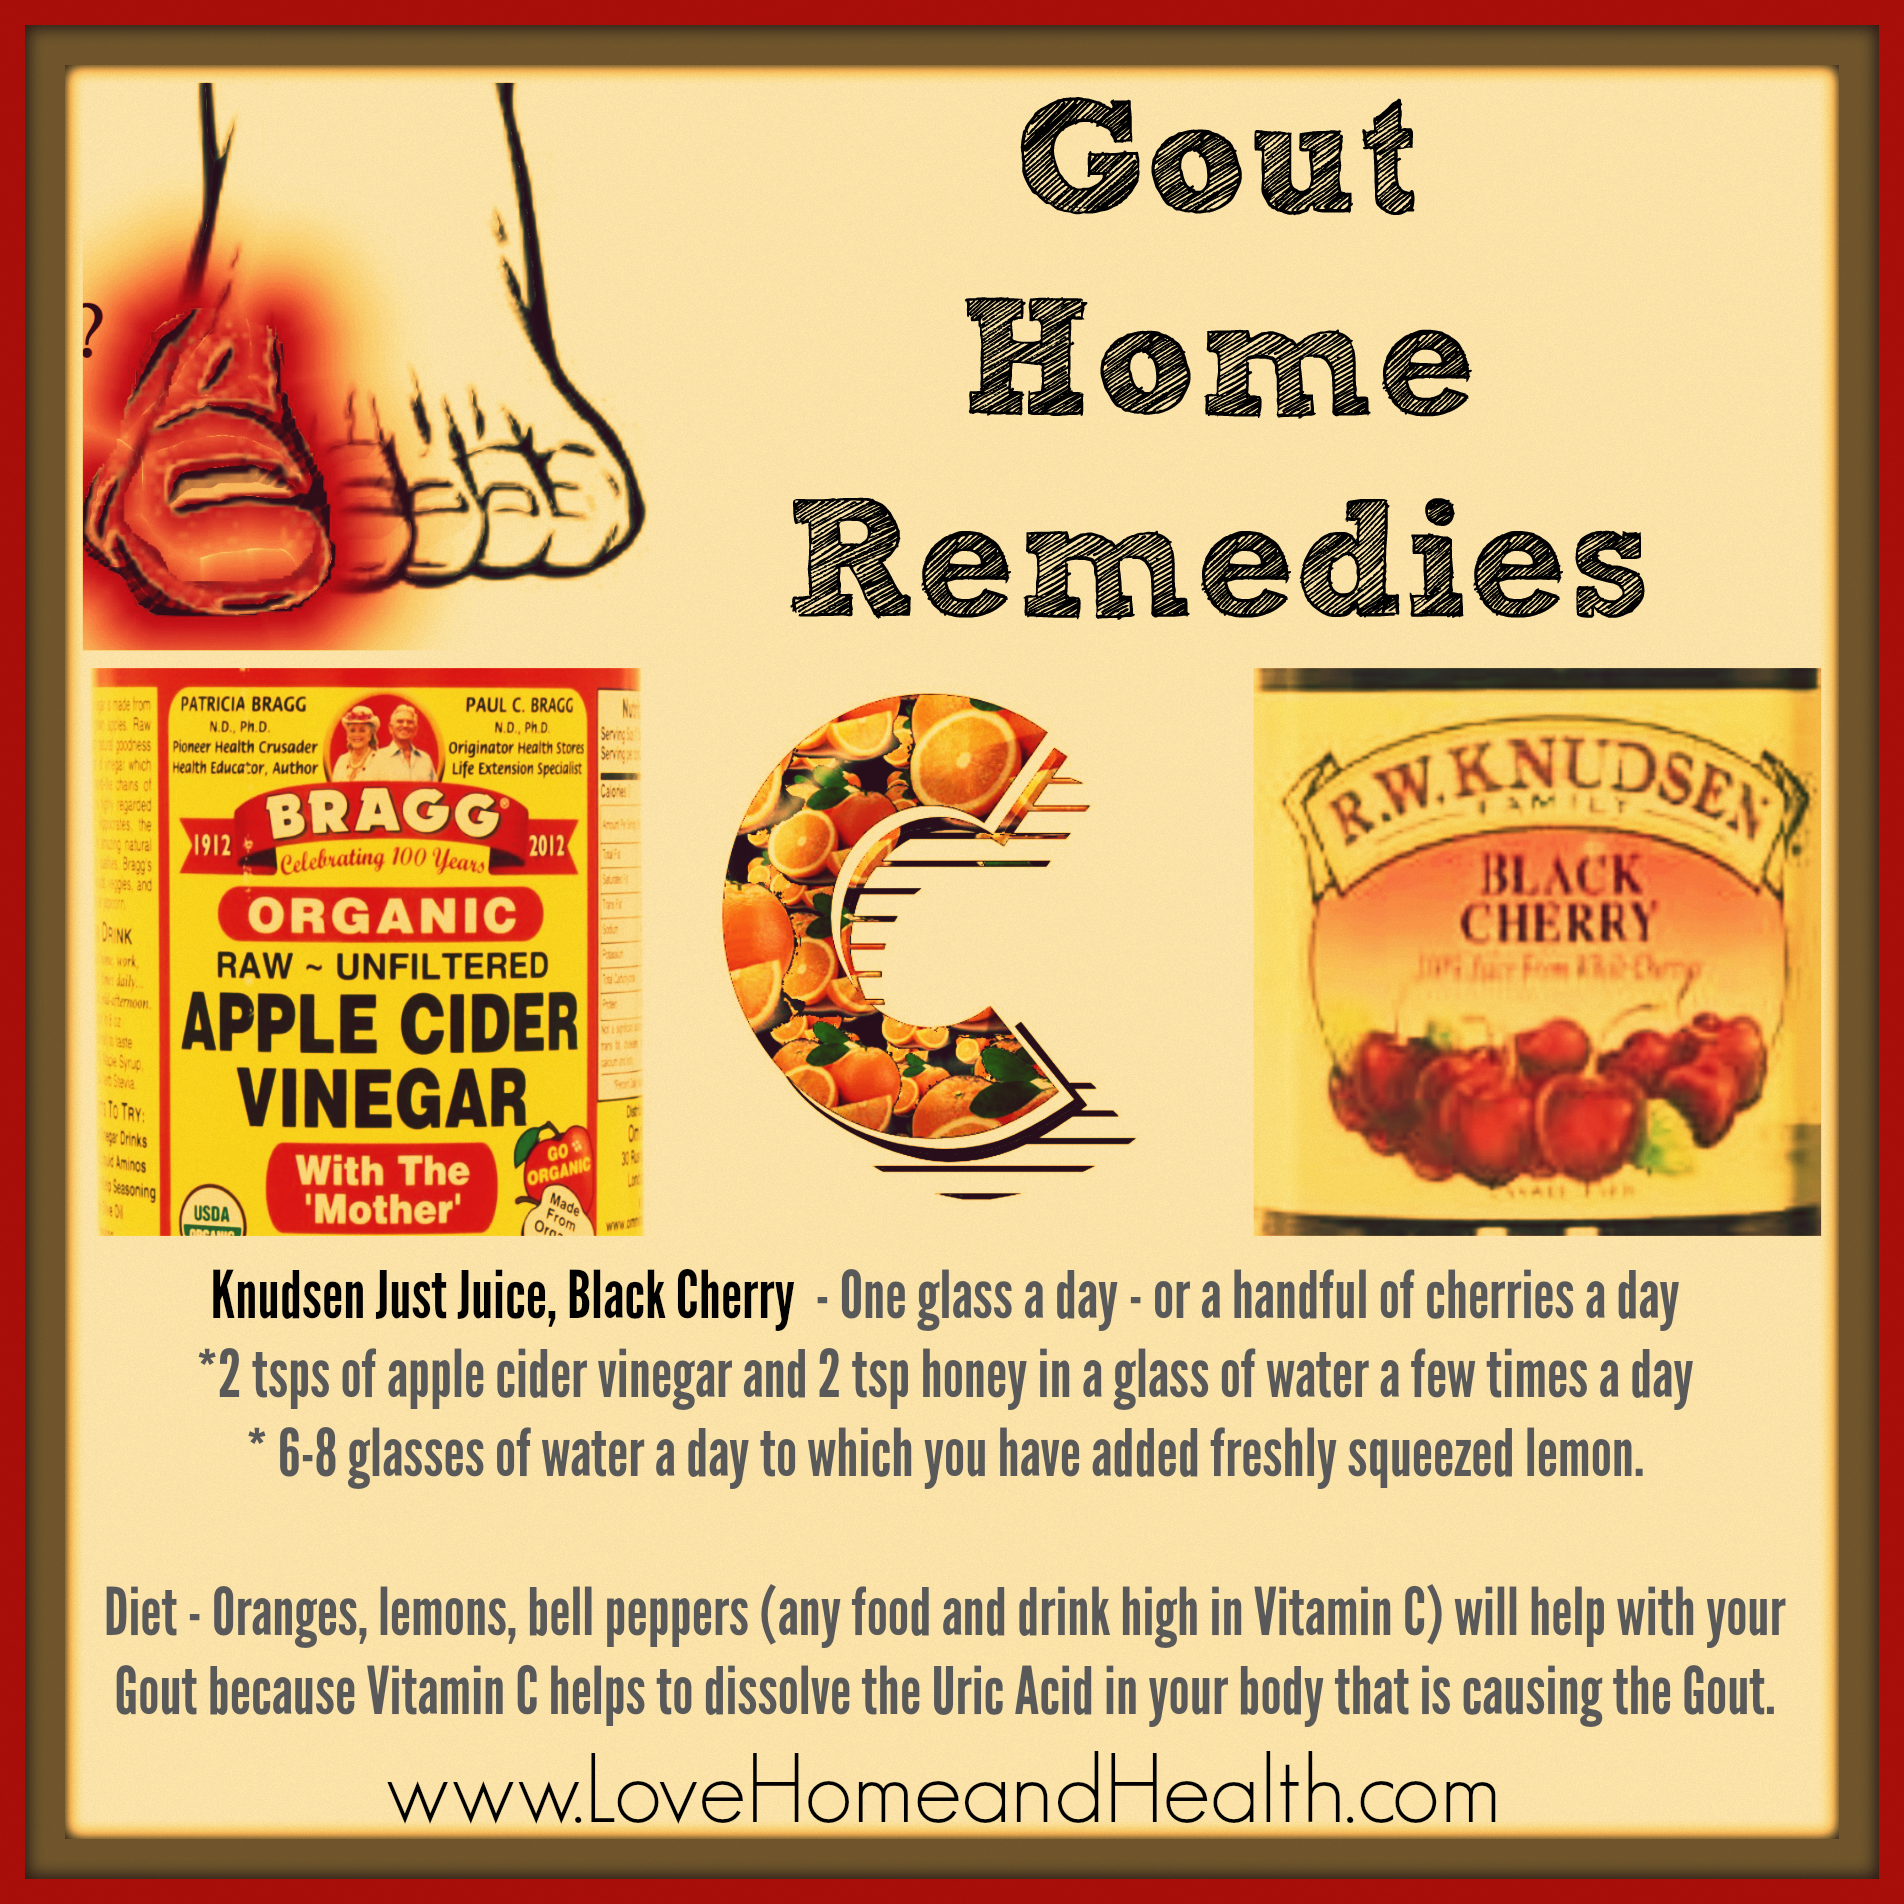 How can you use diet as a remedy for gout in your foot?